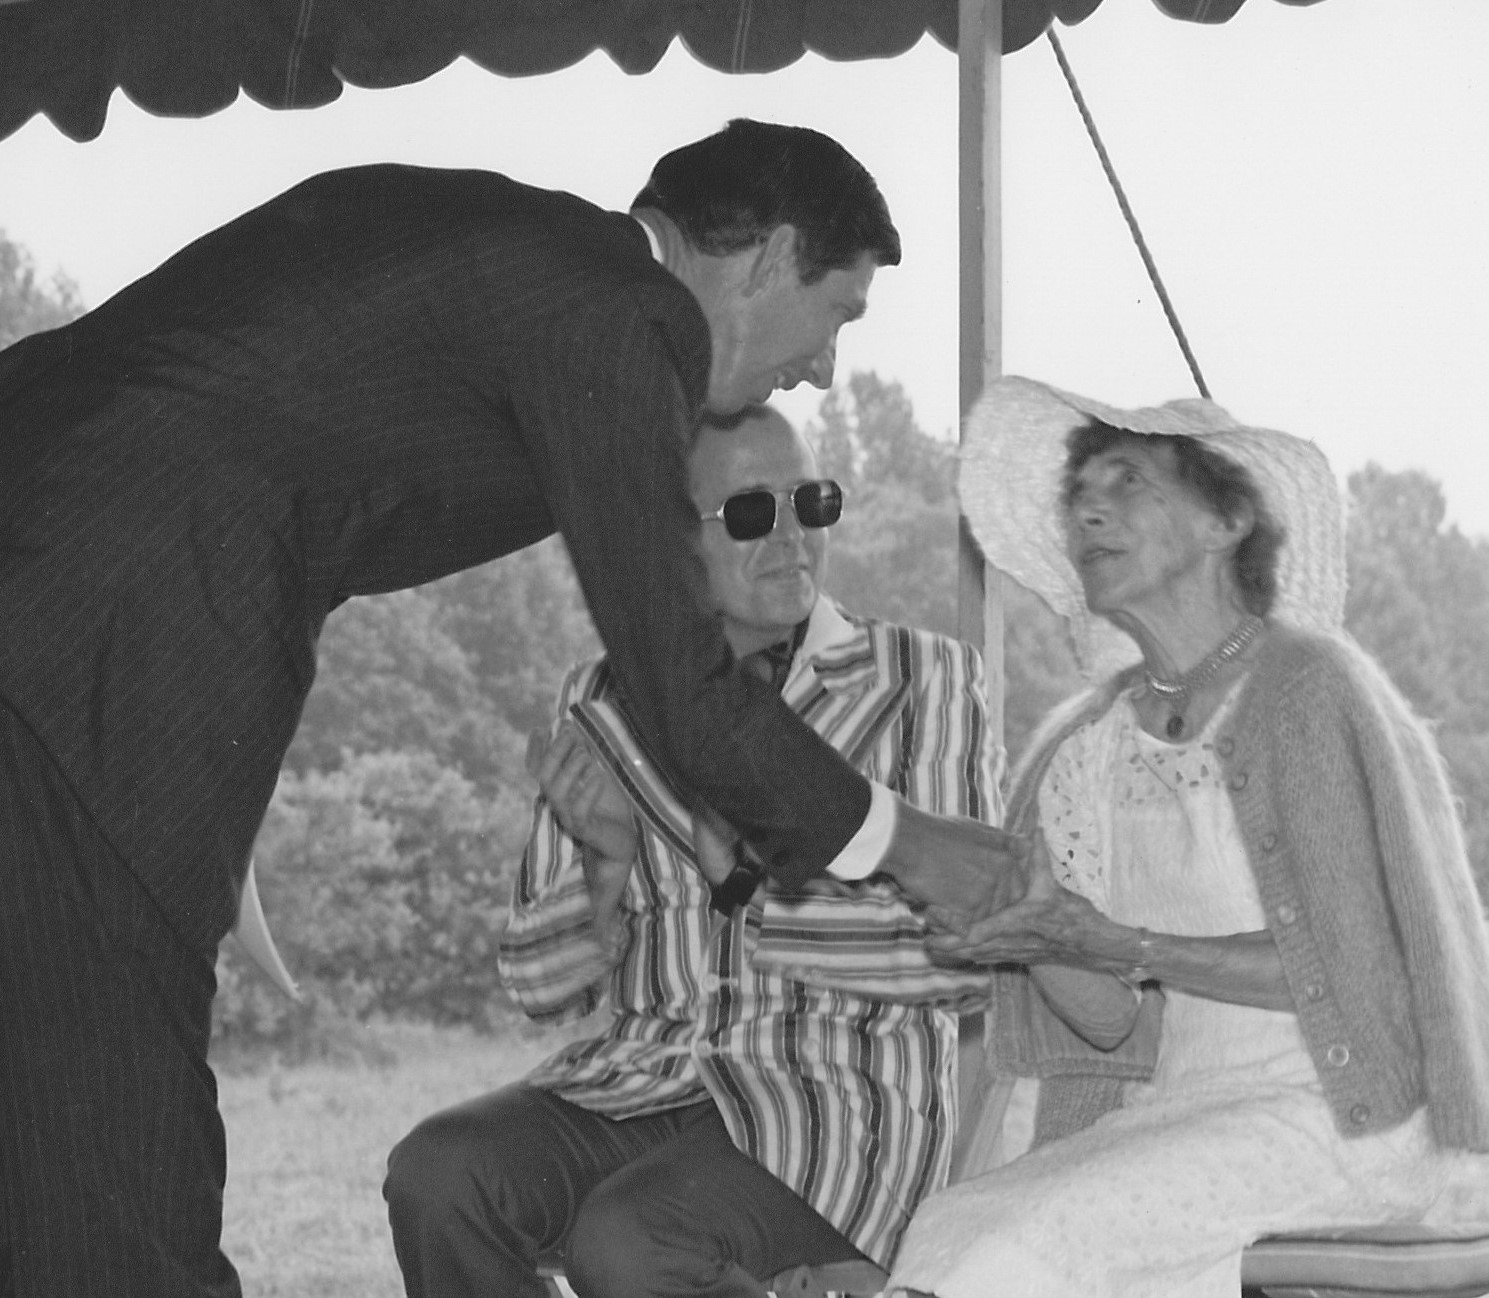 B&W photo of man in dark suit shaking hands with seated woman wearing a hat; man in striped sportcoat and sunglasses next to him